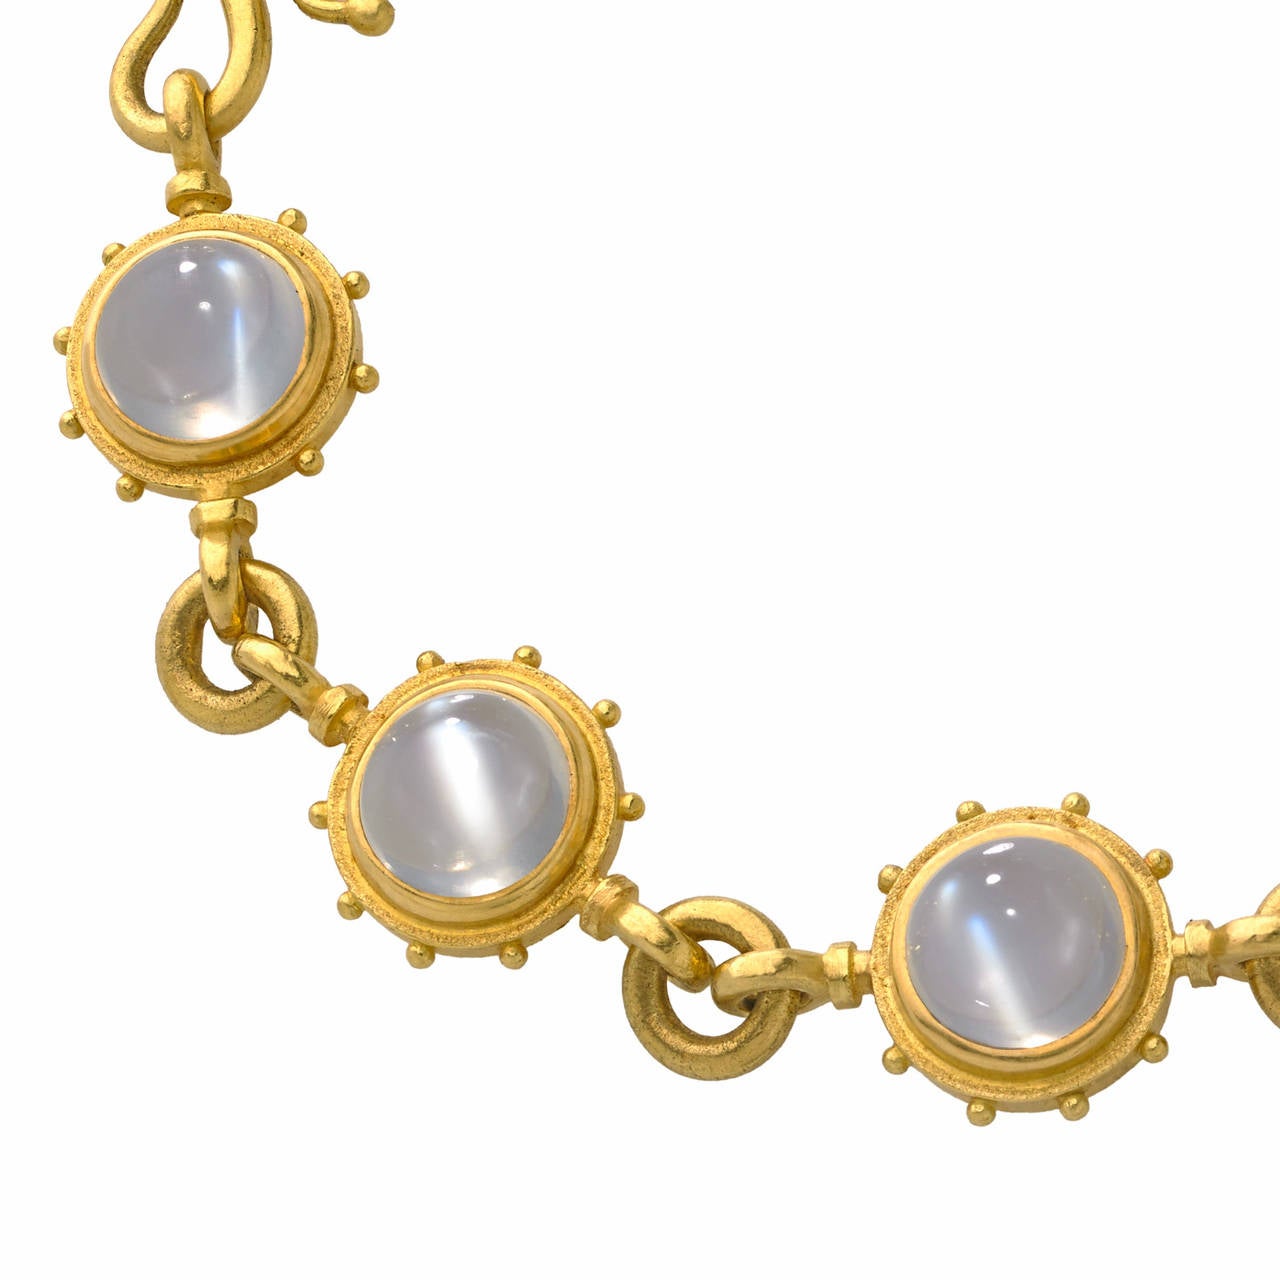 One-of-a-Kind Bracelet handcrafted in 22k yellow gold with eight perfectly-matched cabochon-cut platinum-moonstones exhibiting phenomenal adularescence and a 22k yellow gold 